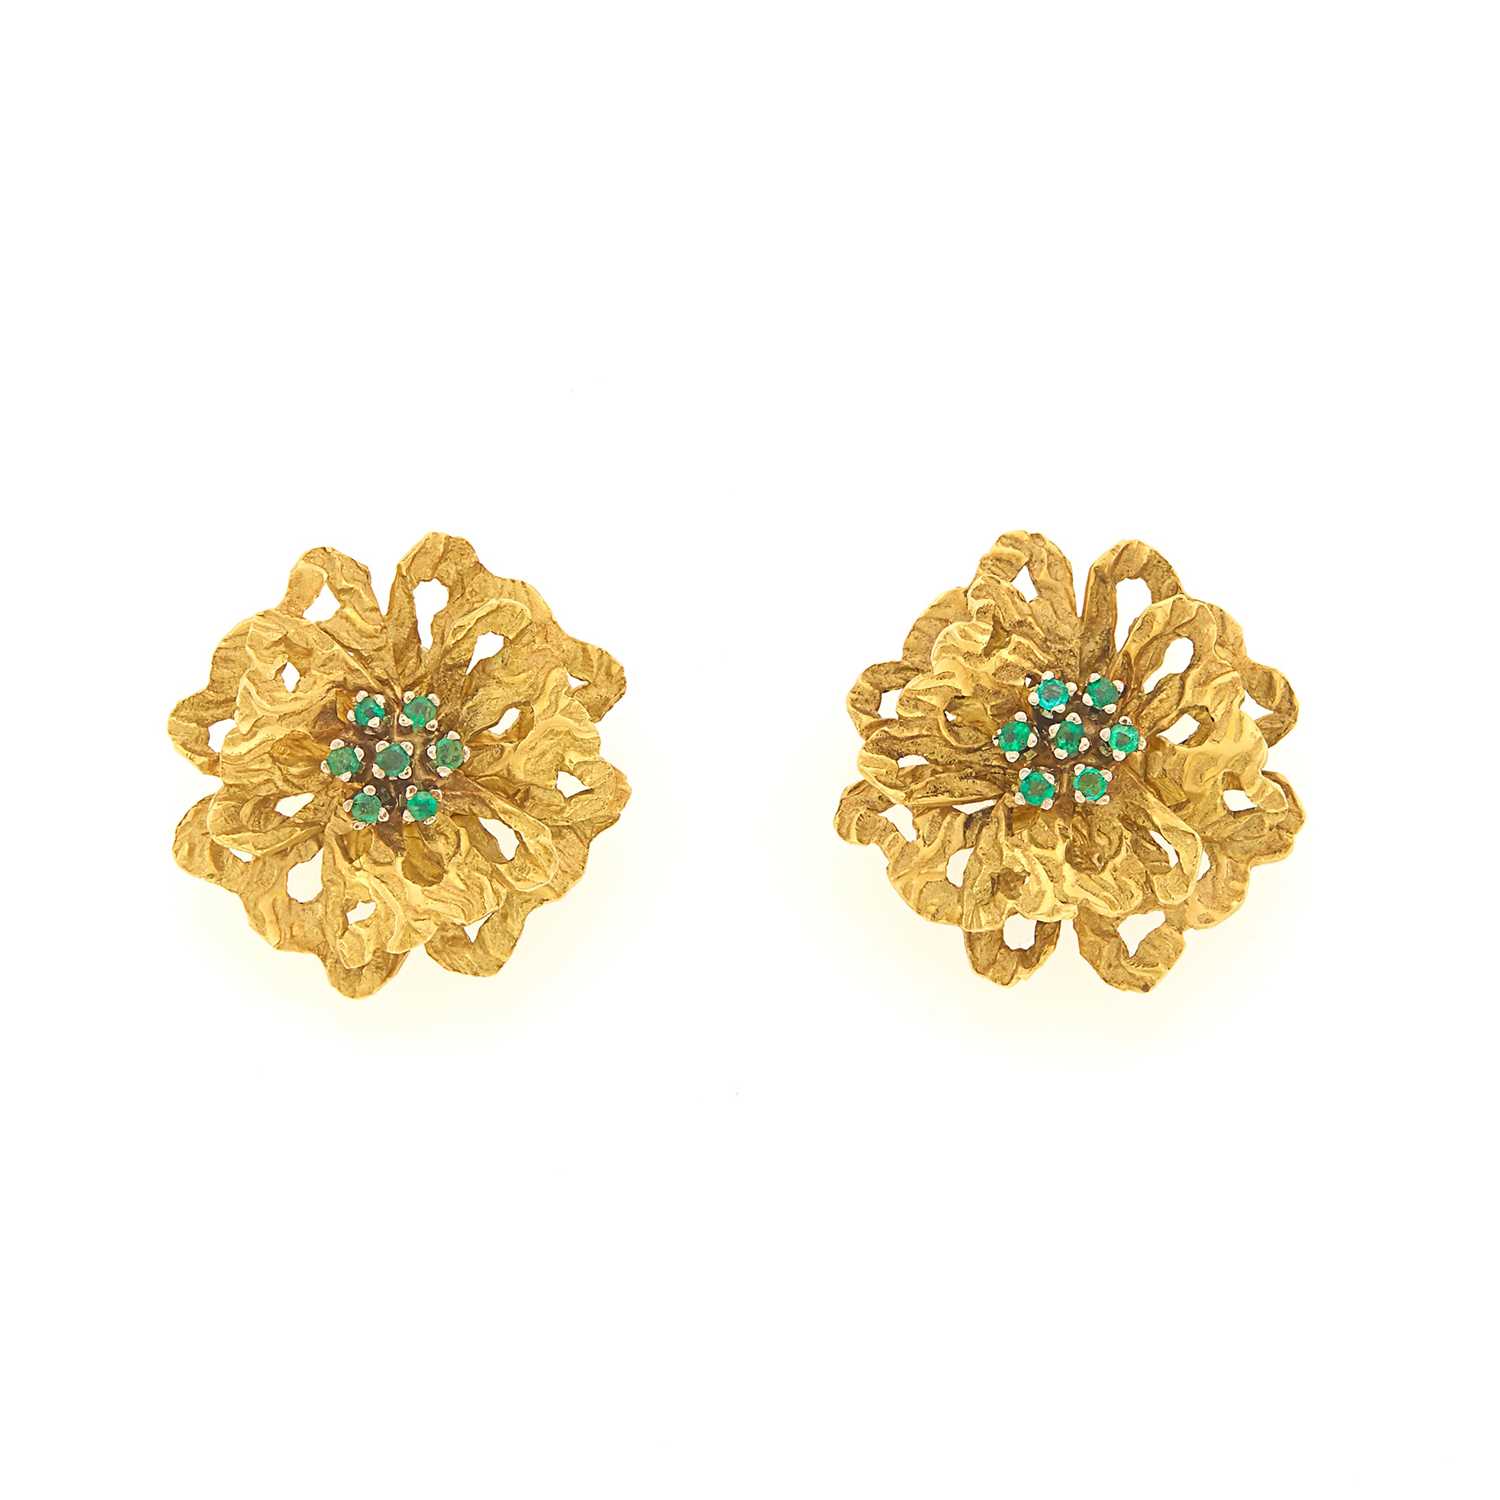 Lot 1043 - Pair of Gold and Emerald Flower Earclips